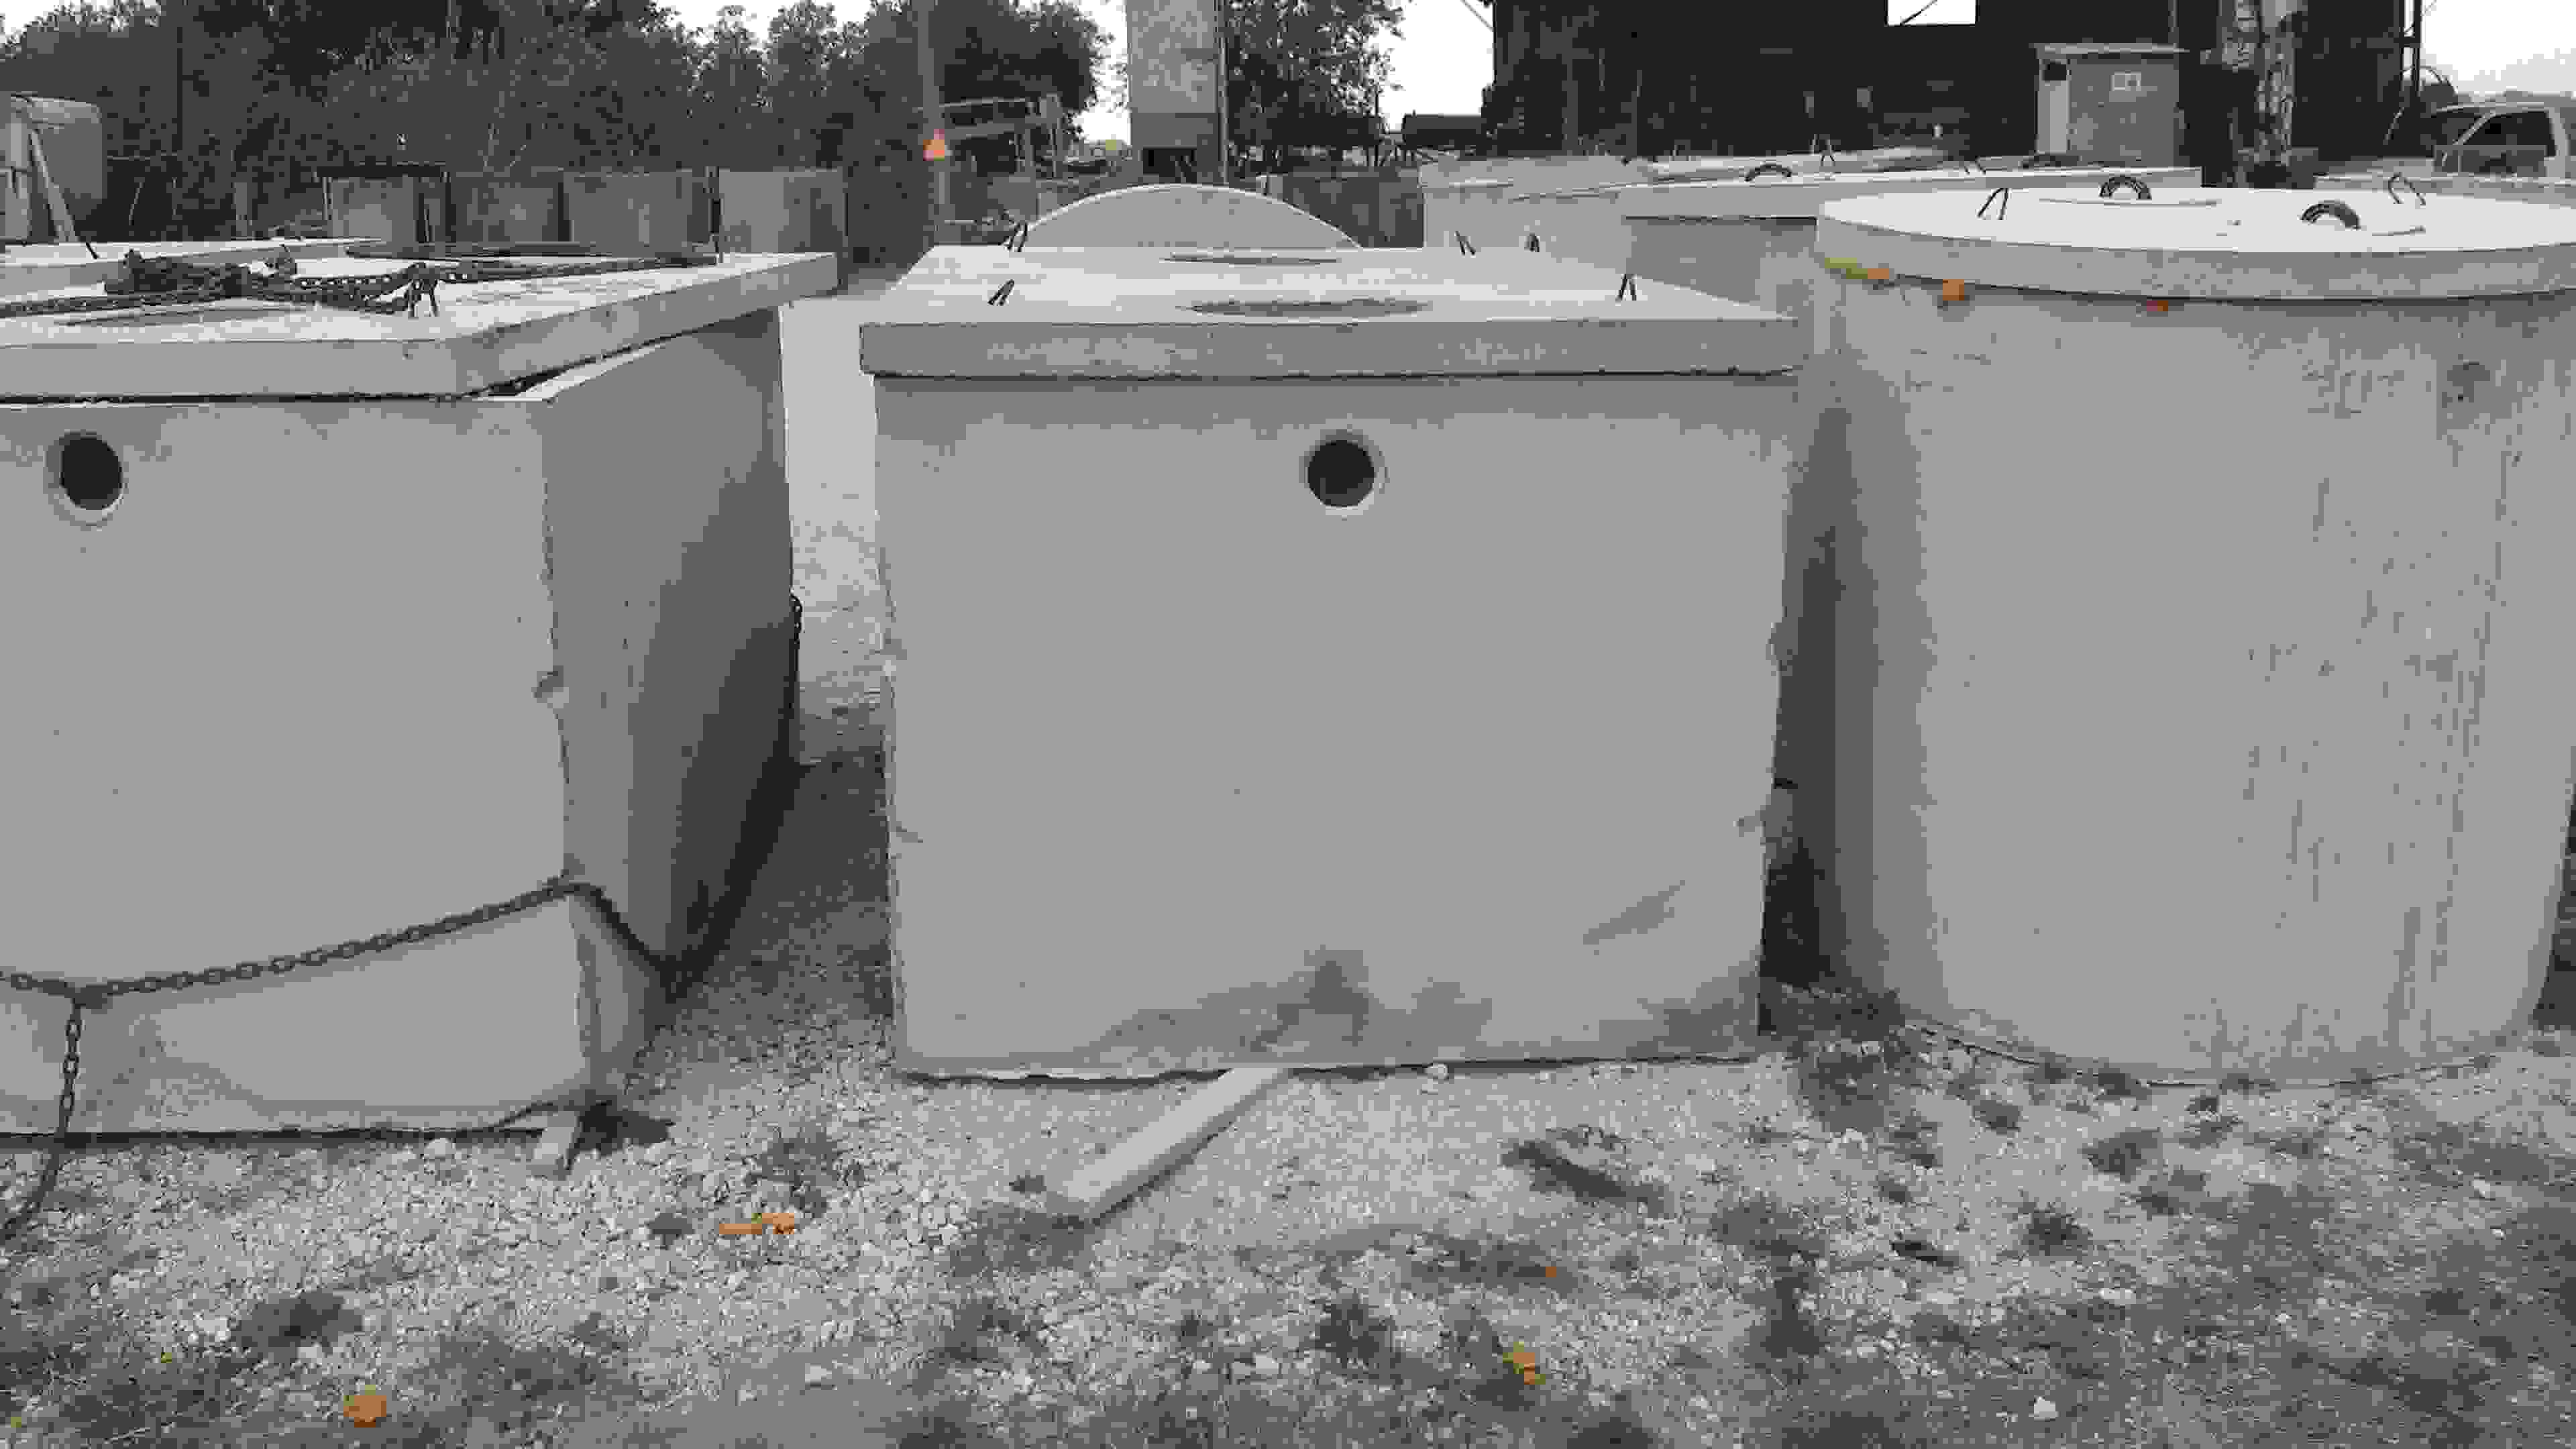 Newly constructed 500-gallon septic tanks